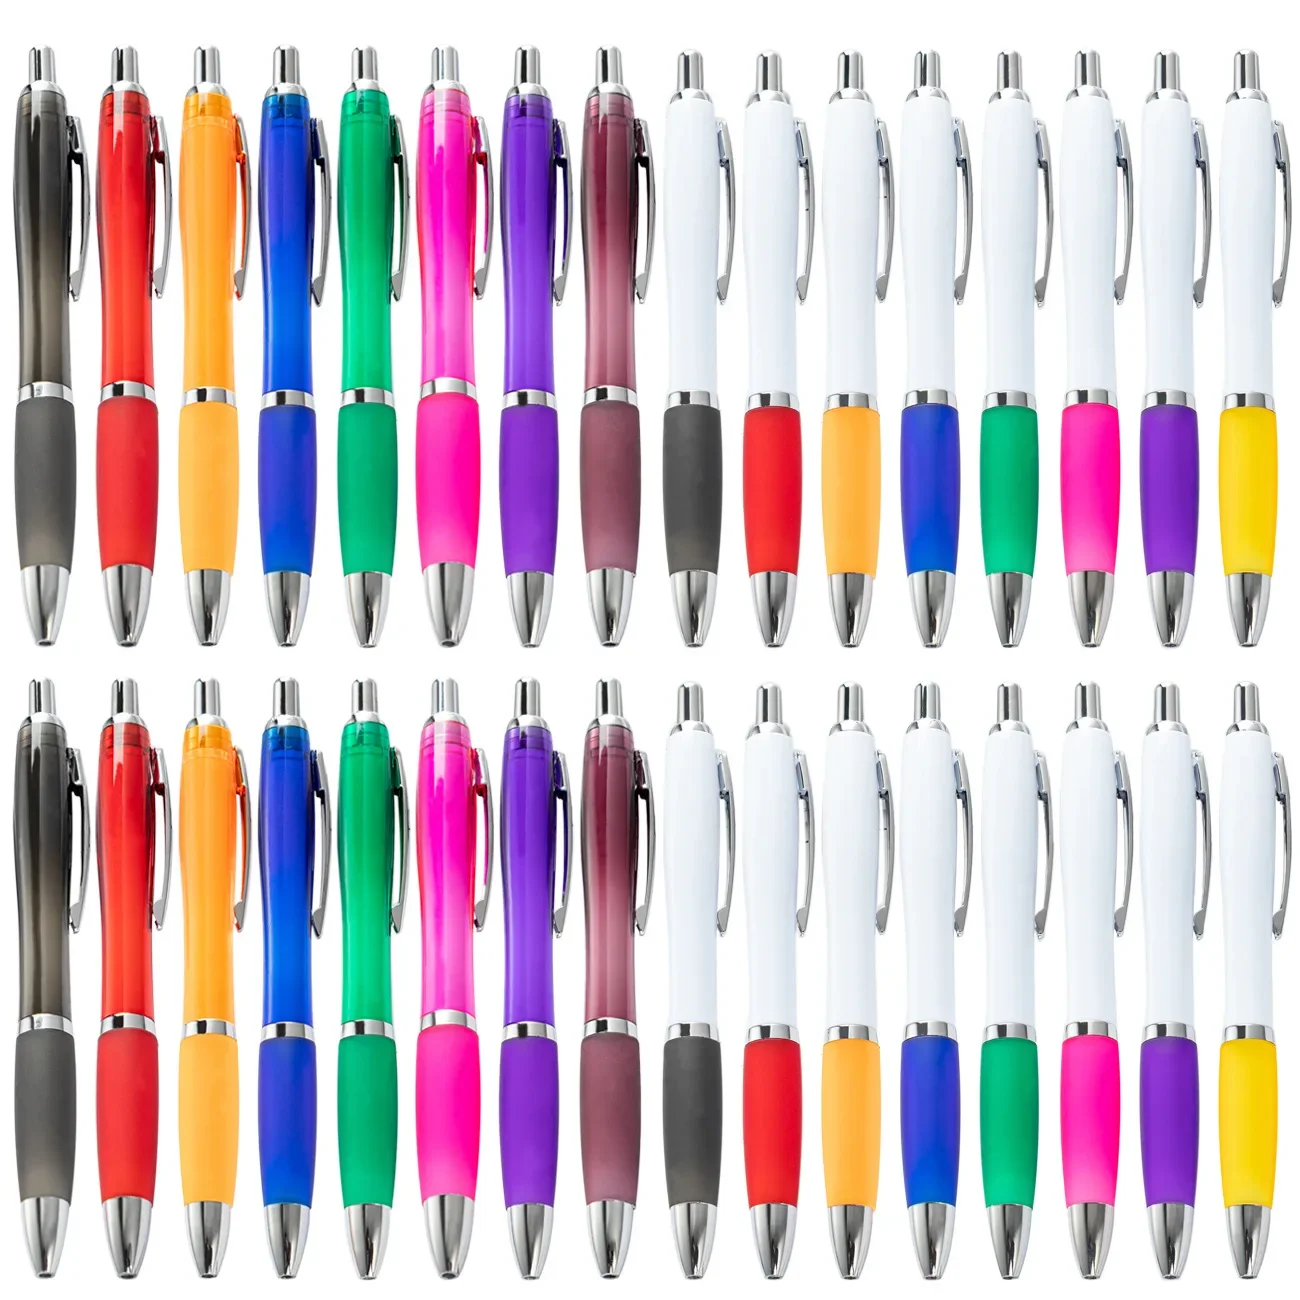 

50pc Multi Colored Gourd Pens Advertisement Plastic Ballpoint Pen Promotion Gift Pen Office Student Stationery Kawaii Stationery